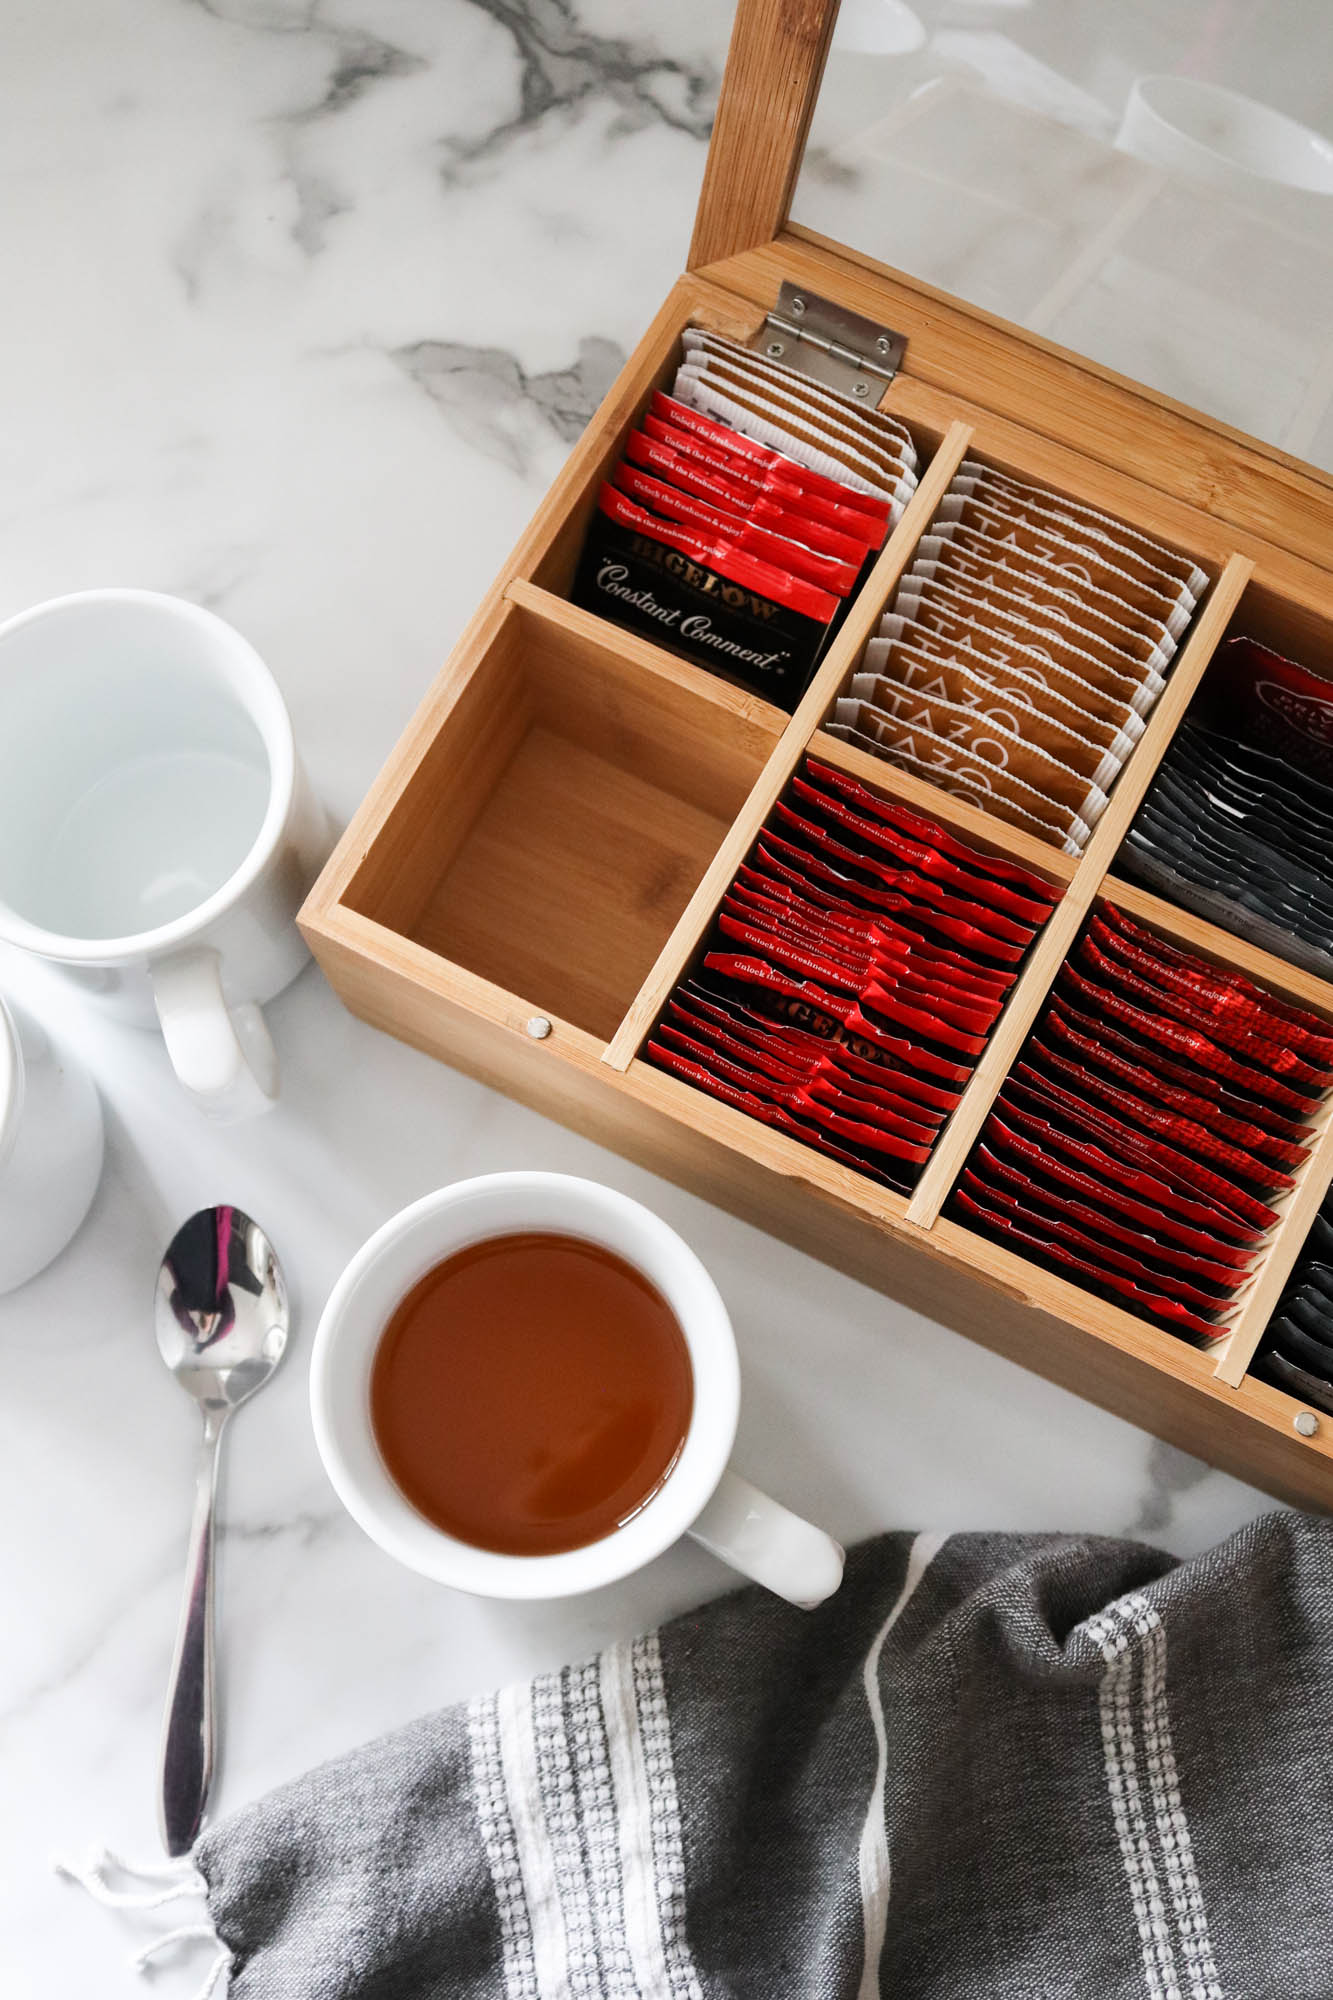 A picture of hot tea packets organized.